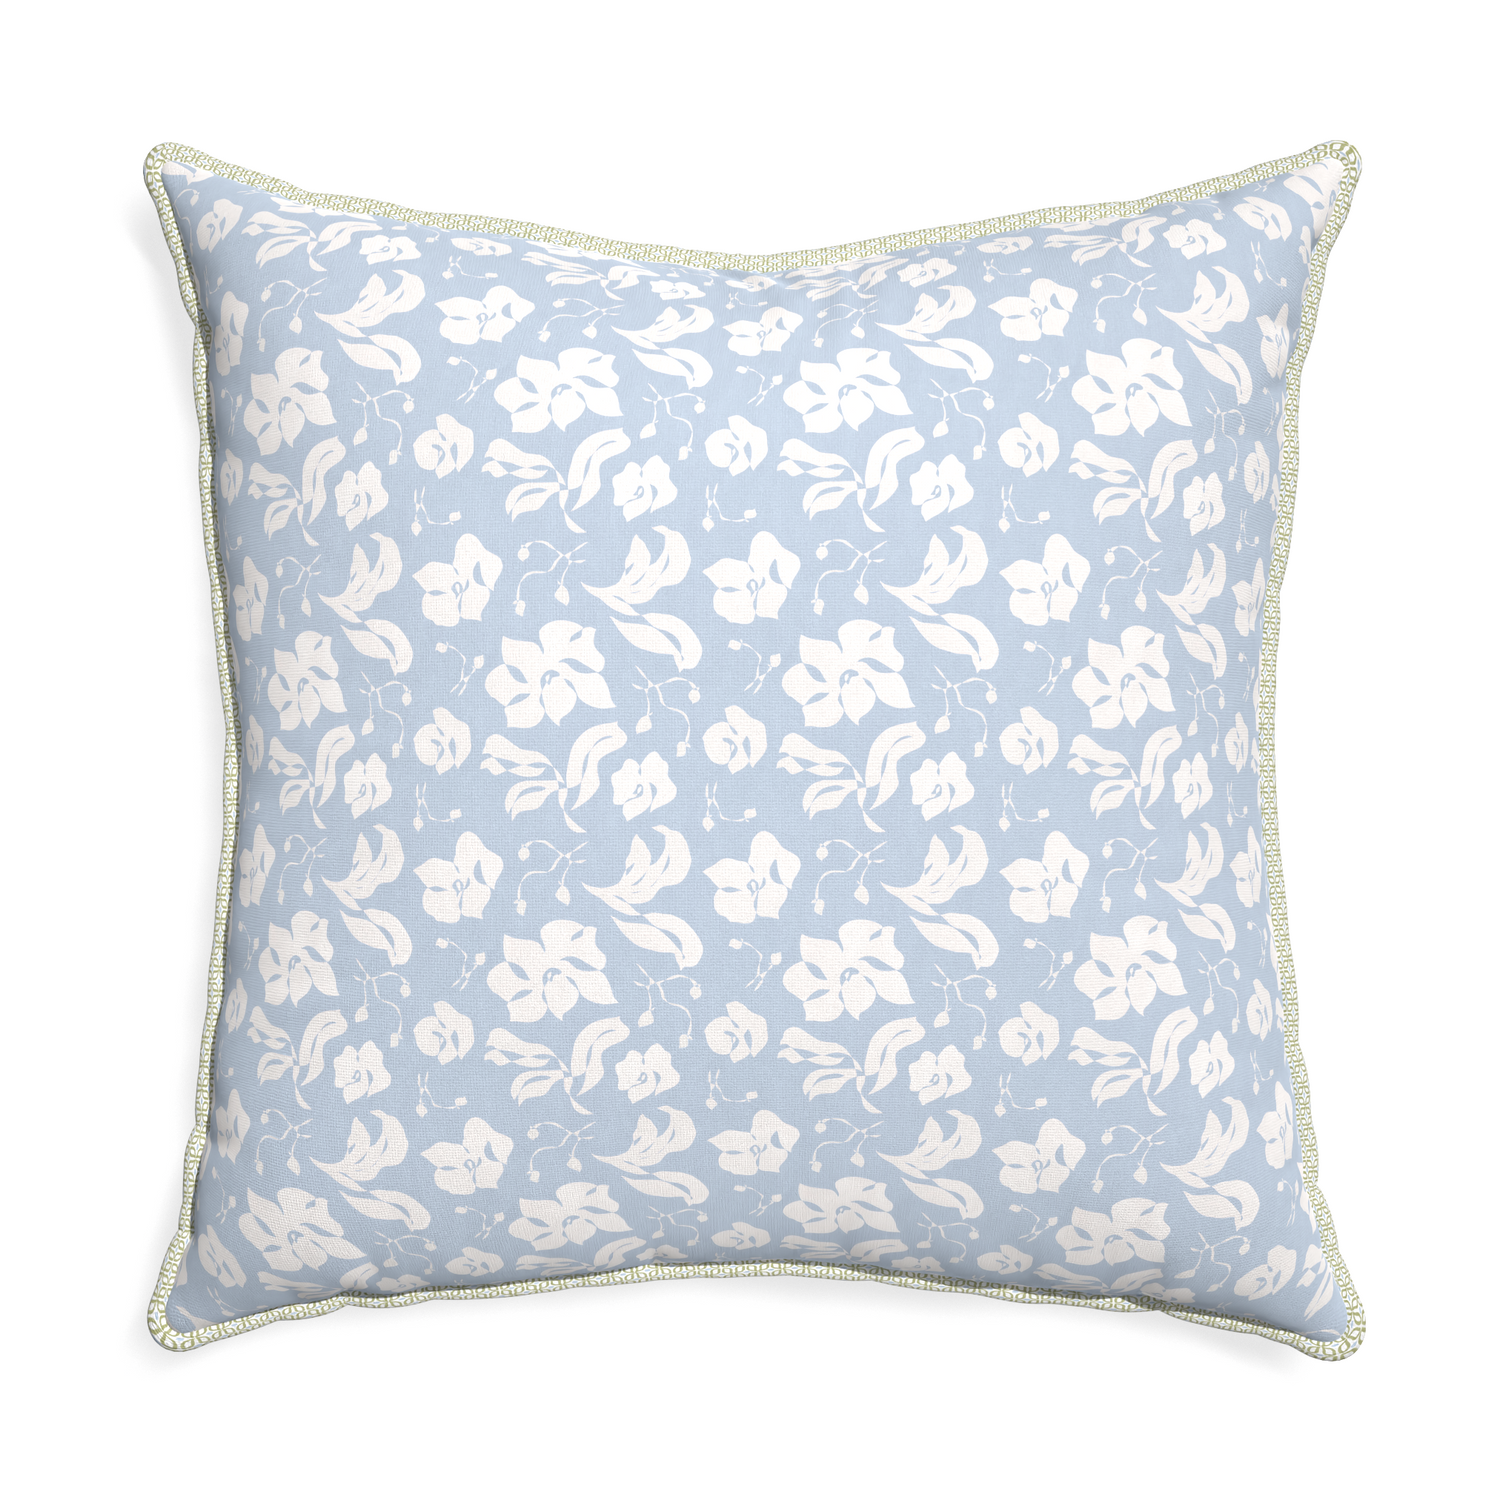 Euro-sham georgia custom pillow with l piping on white background